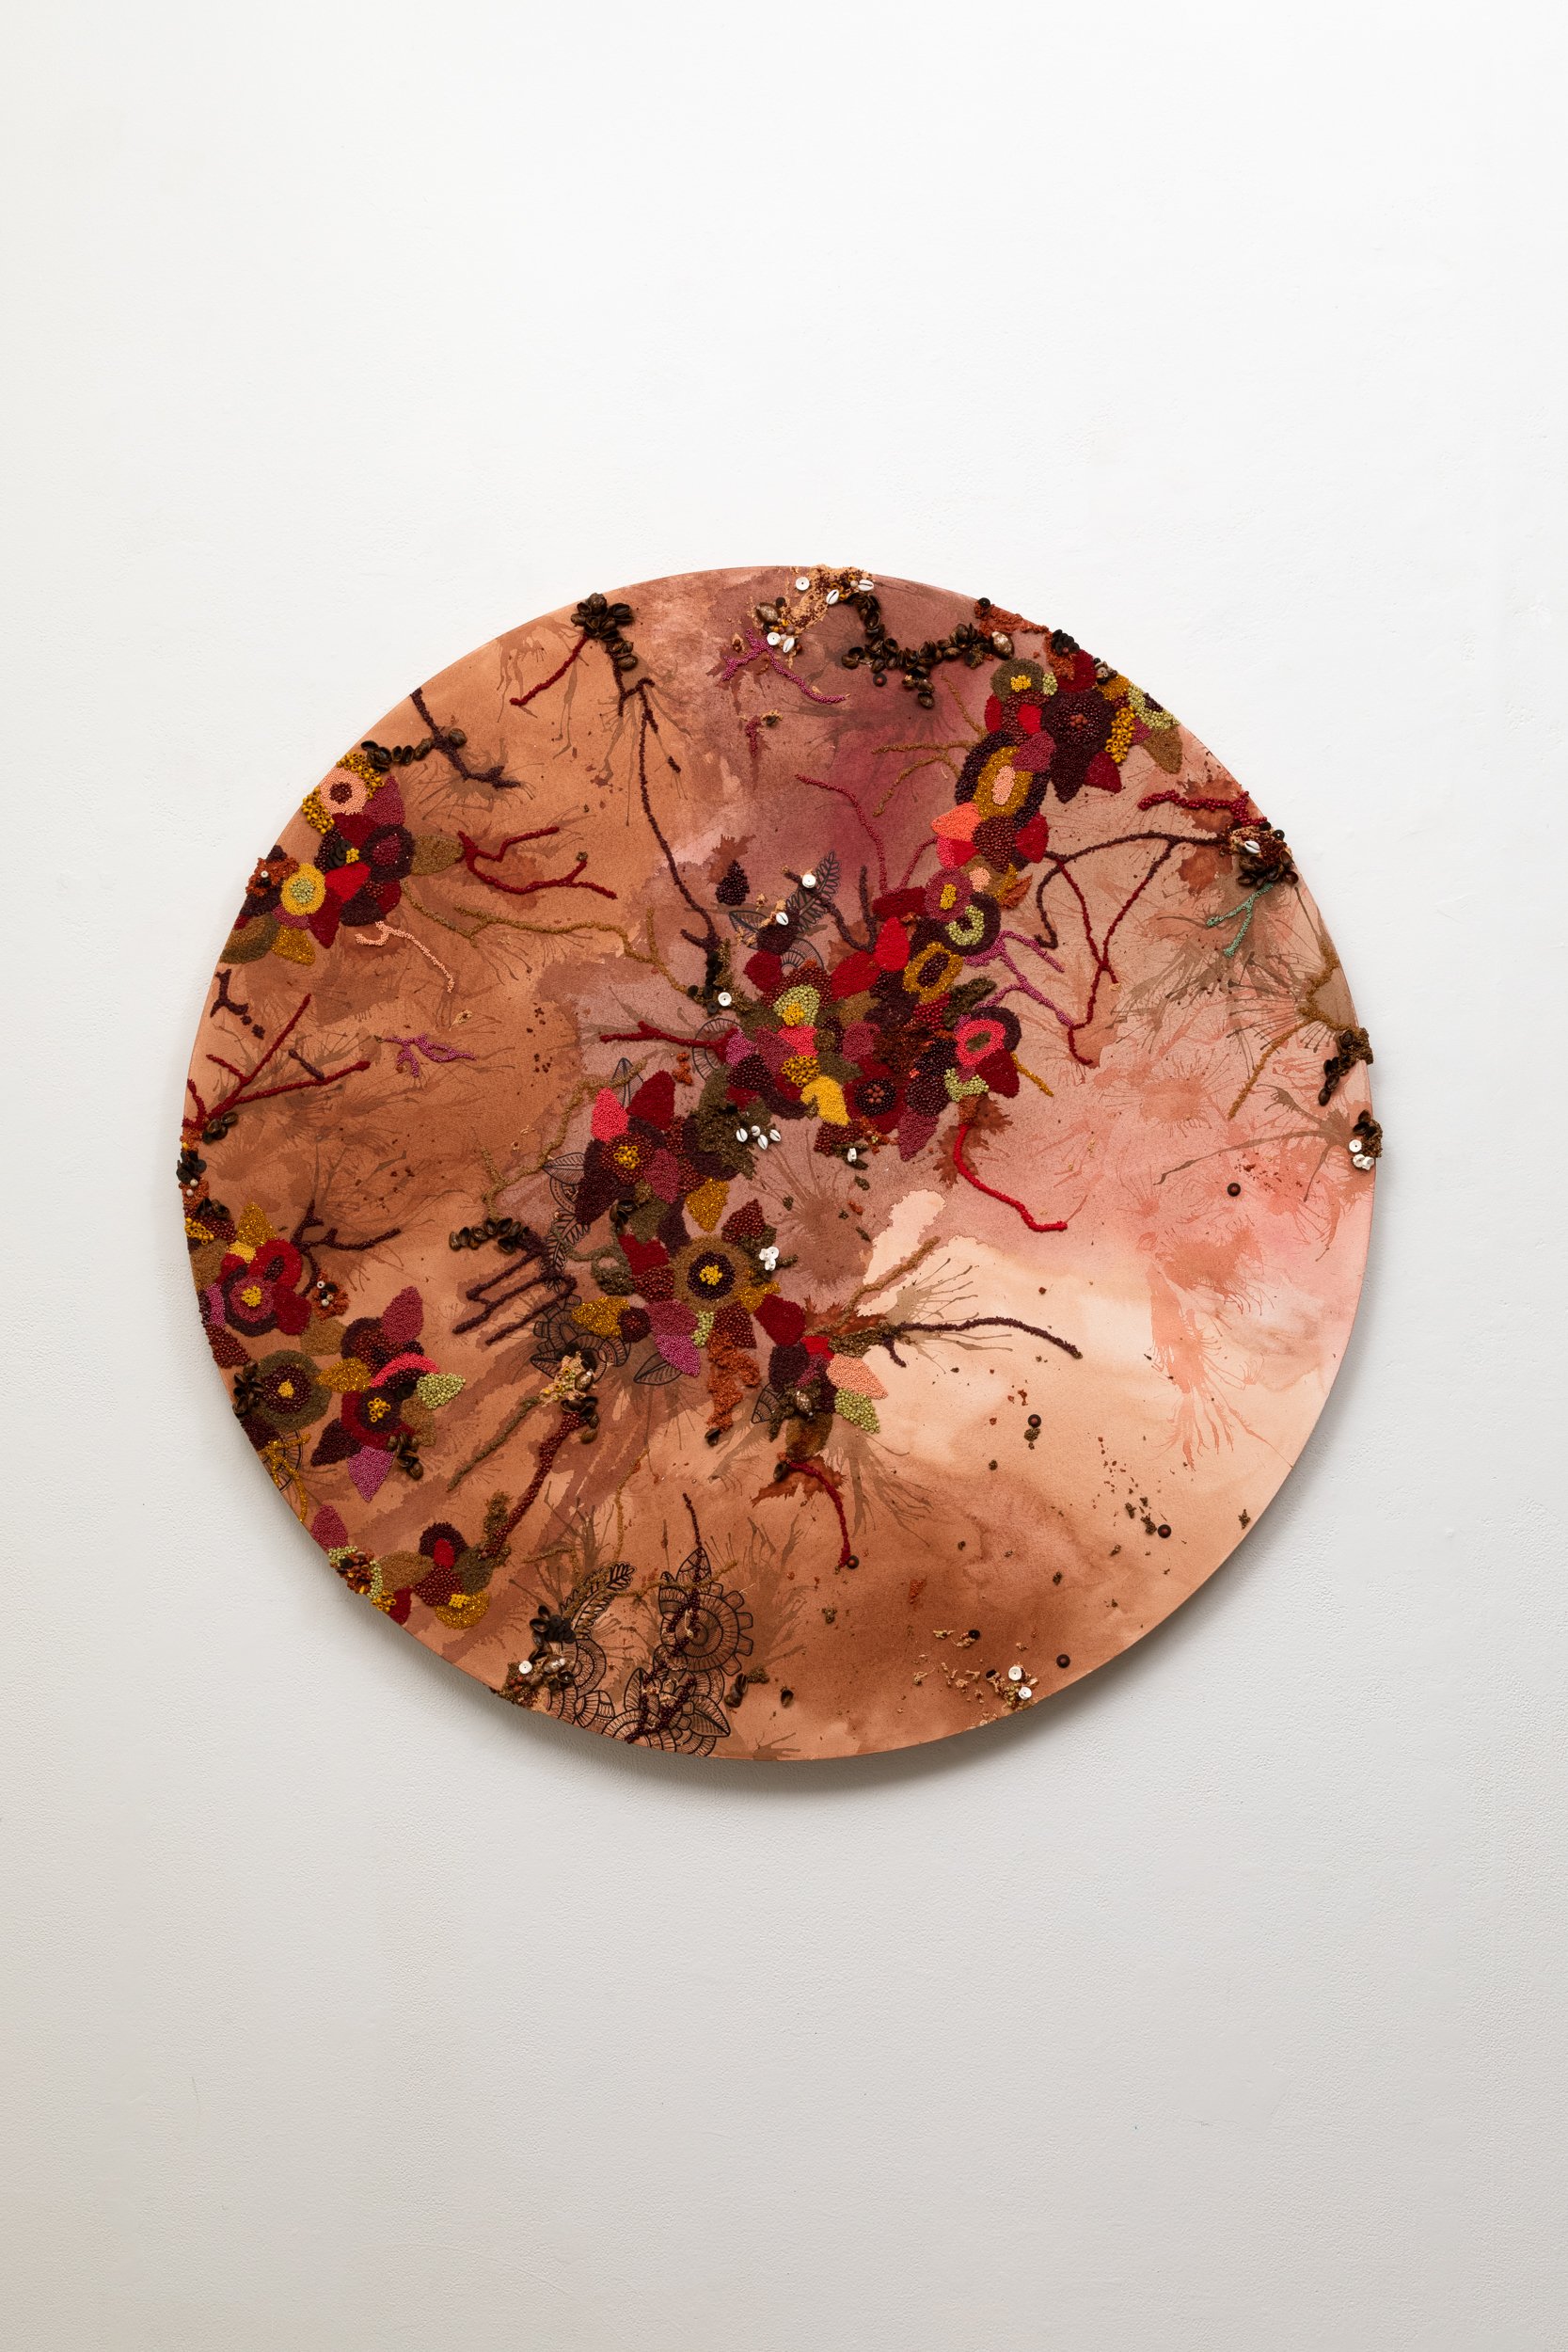  Other Mama's Grandbaby Is the Sun   2023  48 diameter inches  Oil, acrylic, glass beads, pumice, African fish bone, African coconut shell, pistachio shells, jasper, wood, cowries, and breath on cotton canvas 